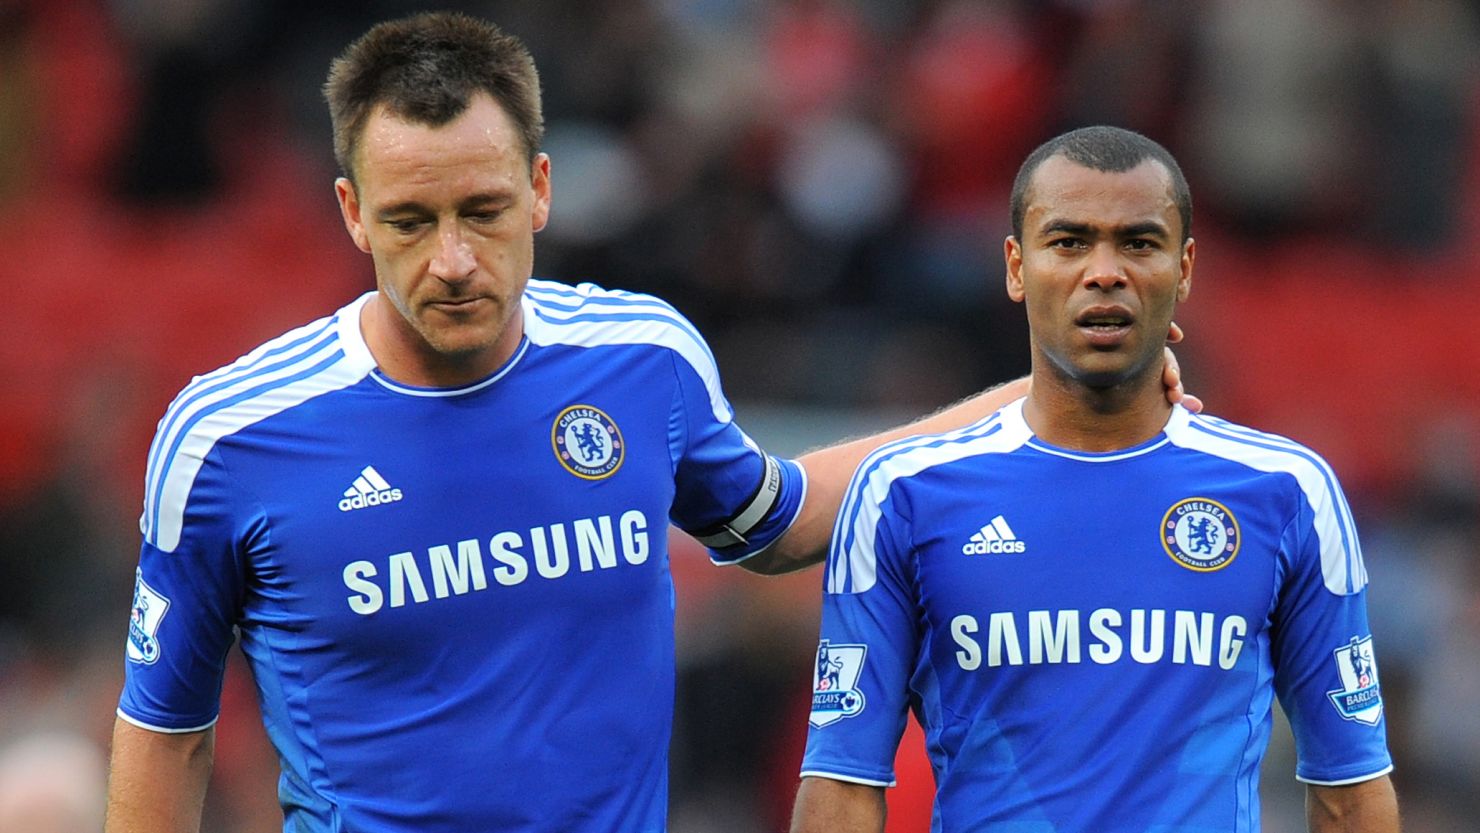 Ashley Cole (right) may incur an FA sanction after his outburst in response to a report which highlighted 'inconsistencies' in the evidence he gave in support of Chelsea team mate John Terry (left) following his racial comments towards Anton Ferdinand last year